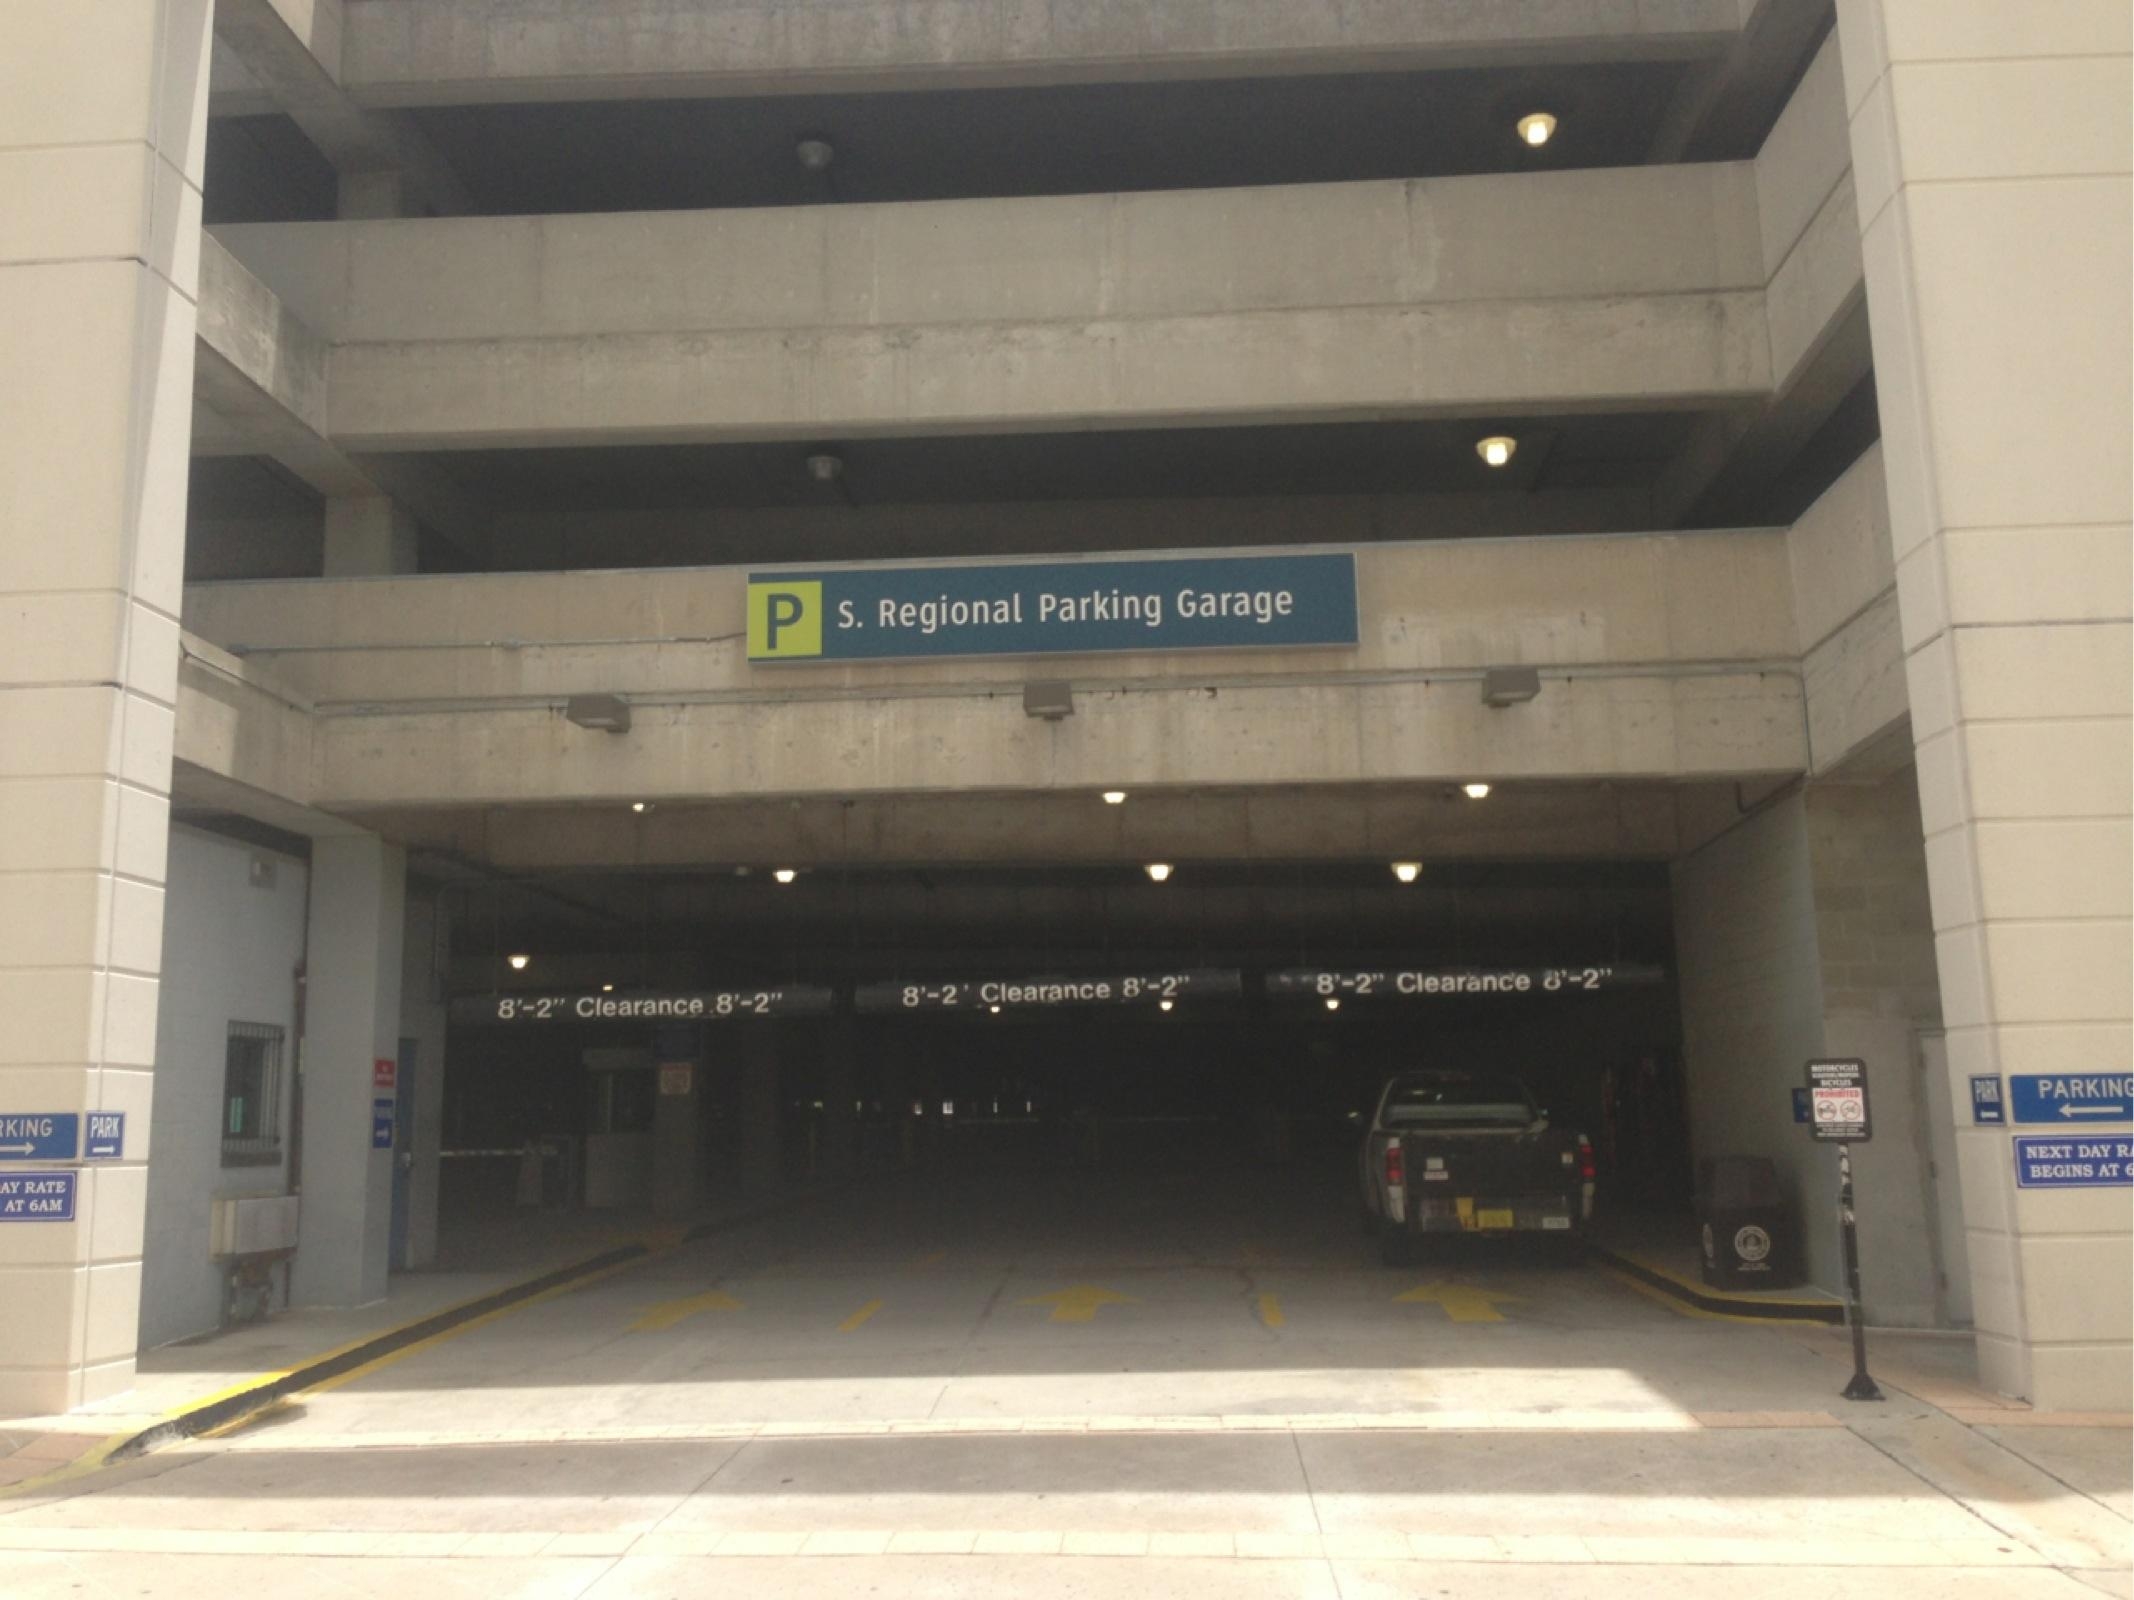 Parking at the Amalie Arena